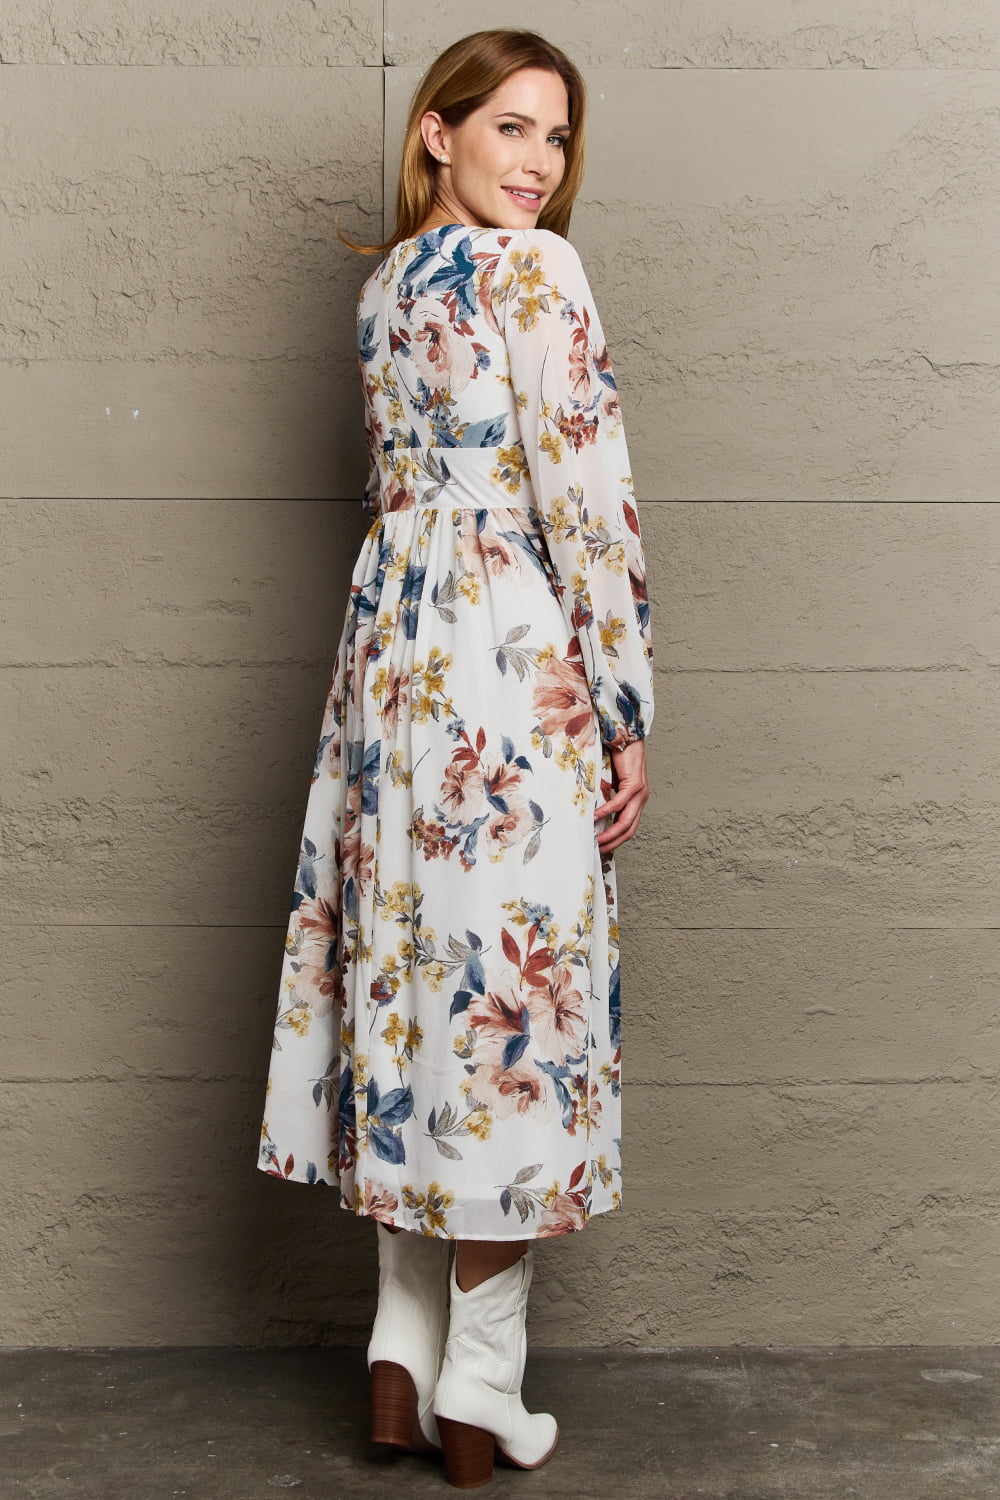 Blooms of Grace: Chiffon Floral Midi Dress with Timeless Elegance